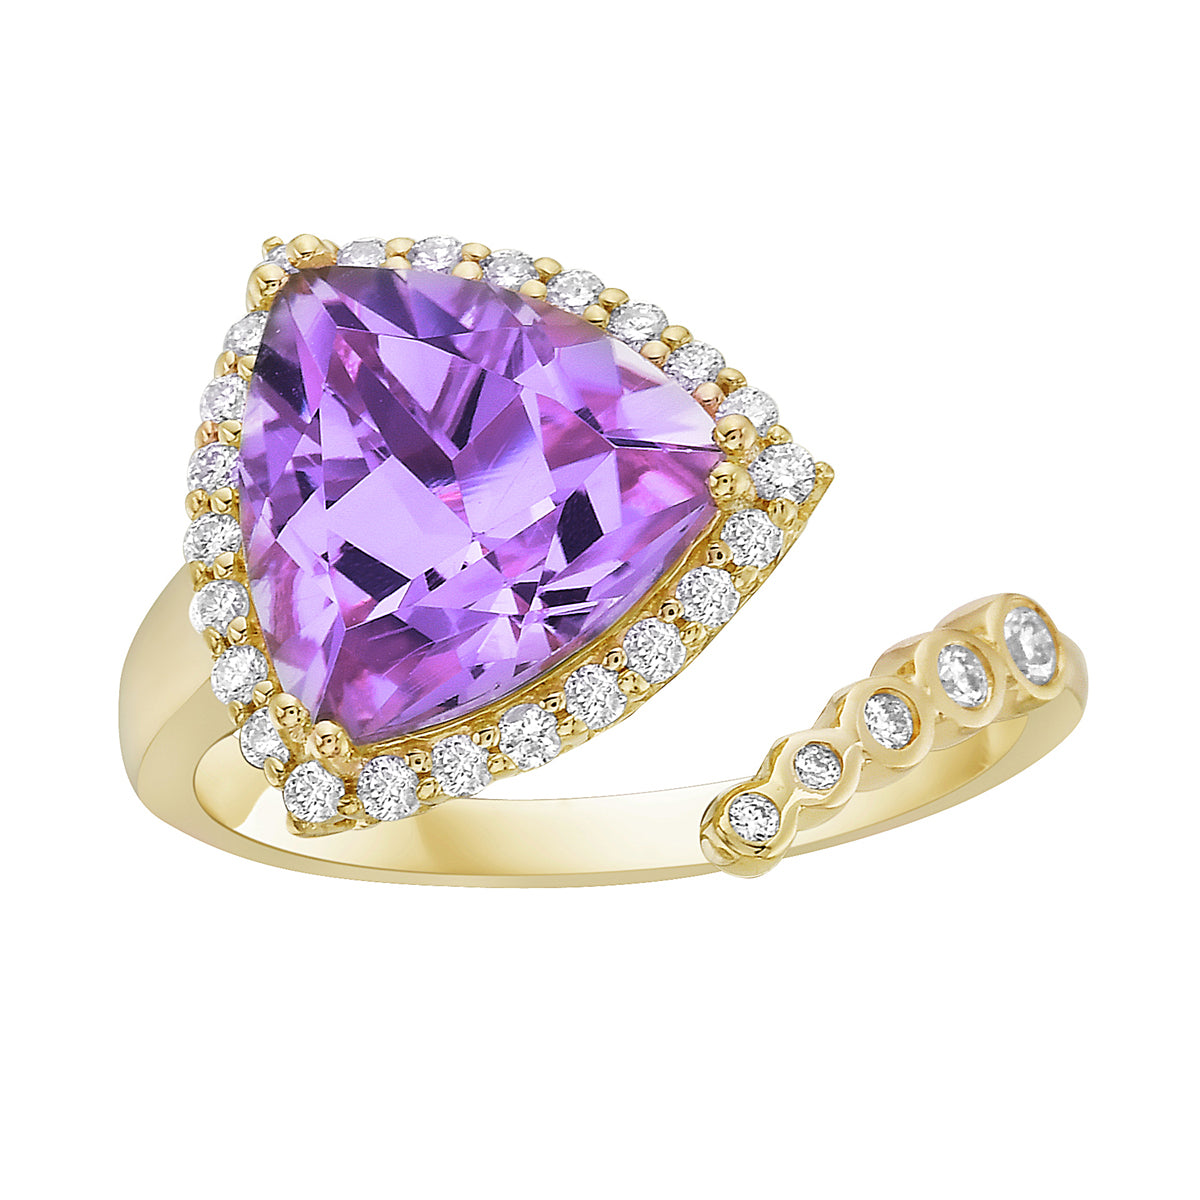 Ring 14KY/3.1G 1AME-3.24CT 29RD-0.28CT Amethyst